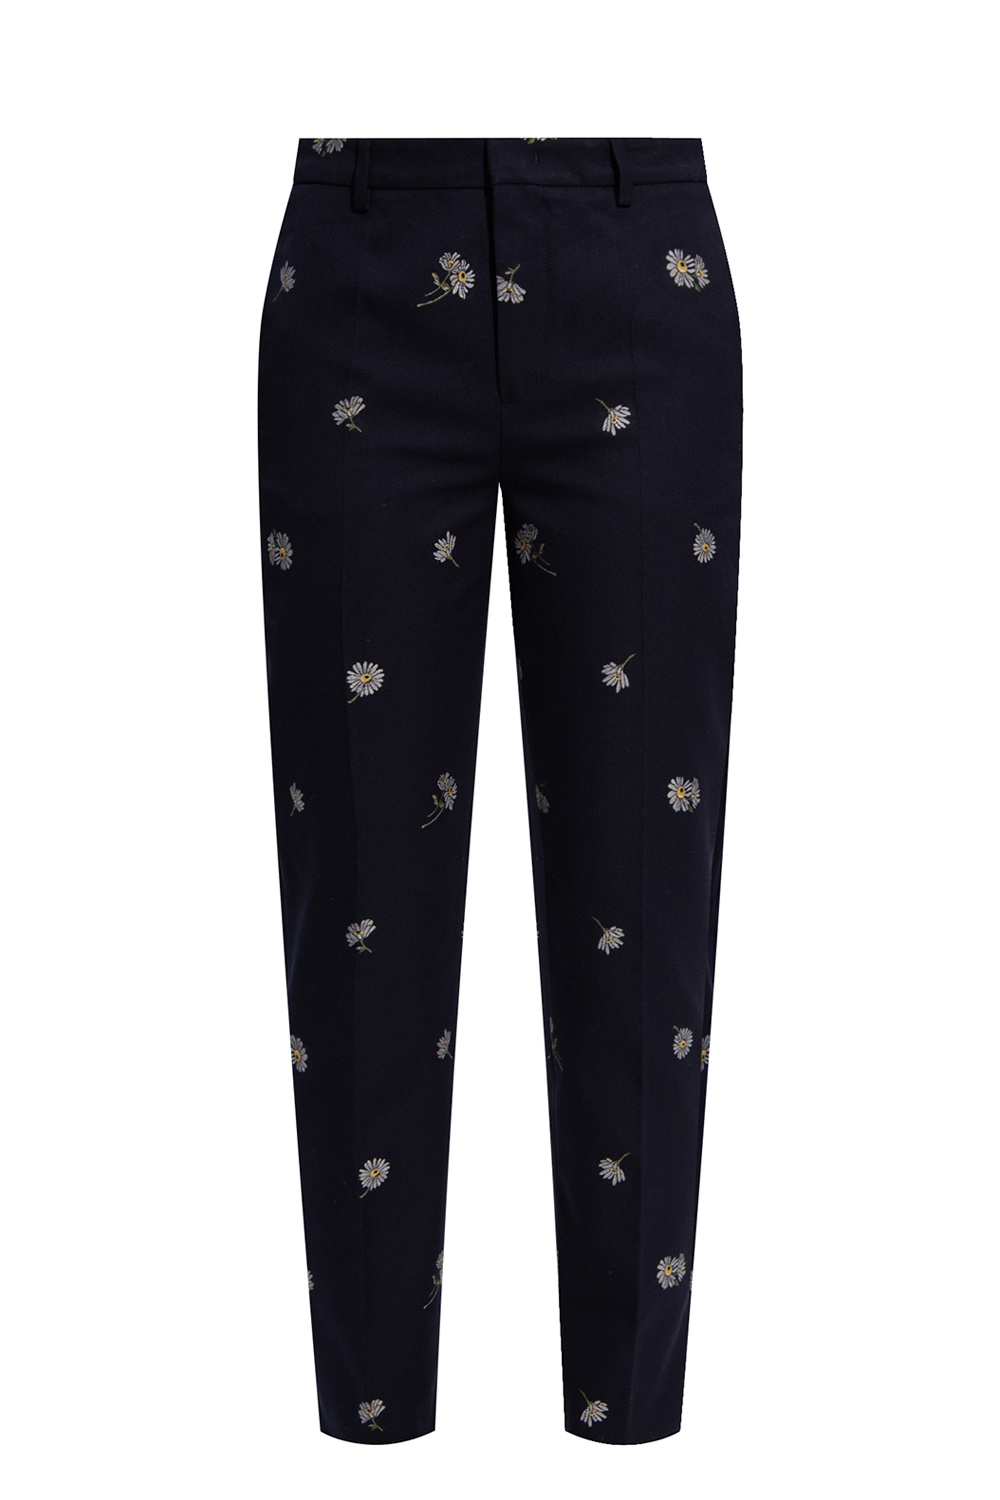 Women's Clothing | IetpShops | Red Valentino Floral print trousers | Cece dress